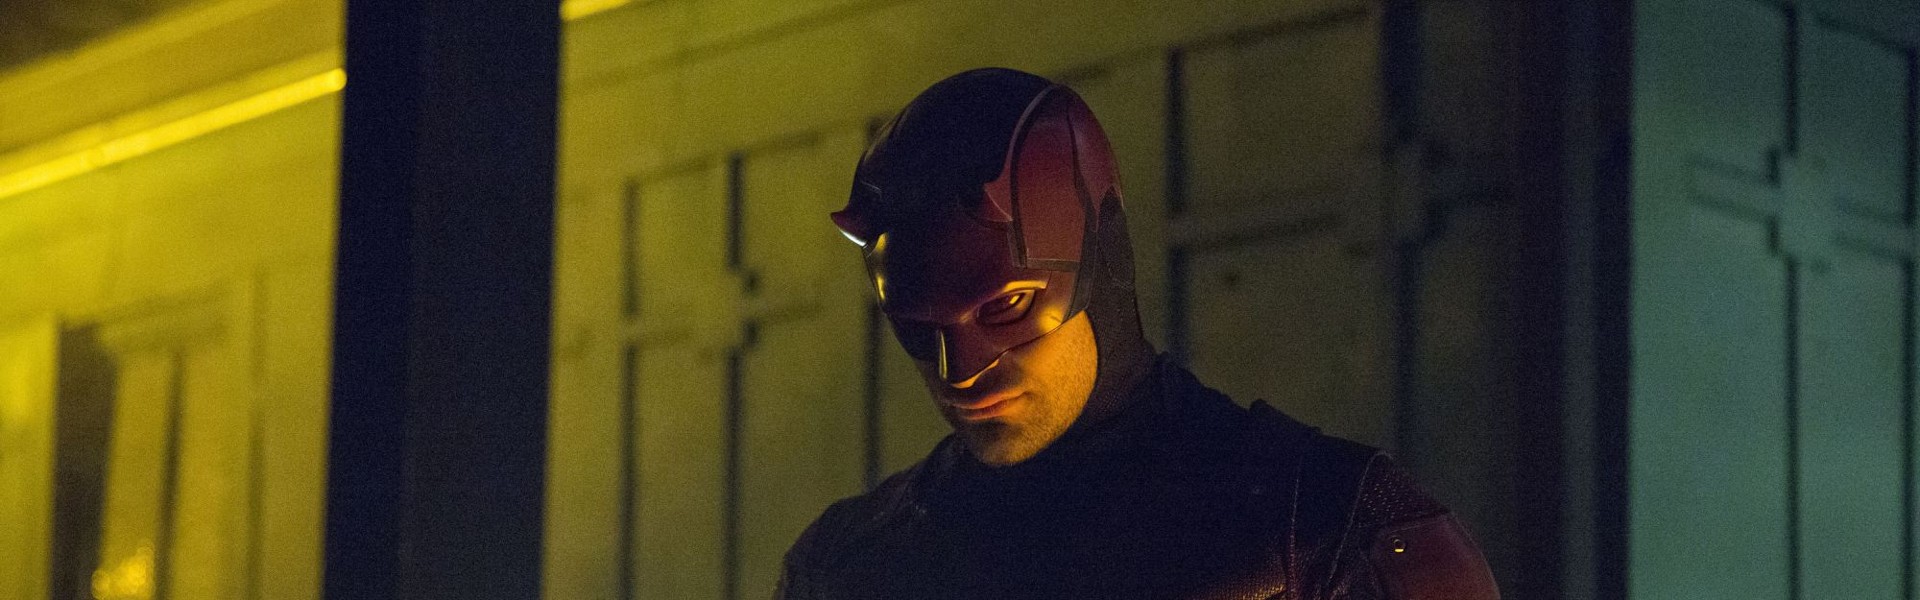 “Daredevil: Born Again” has a new showrunner and directors. They are the creators of “The Punisher” and “Loki.”